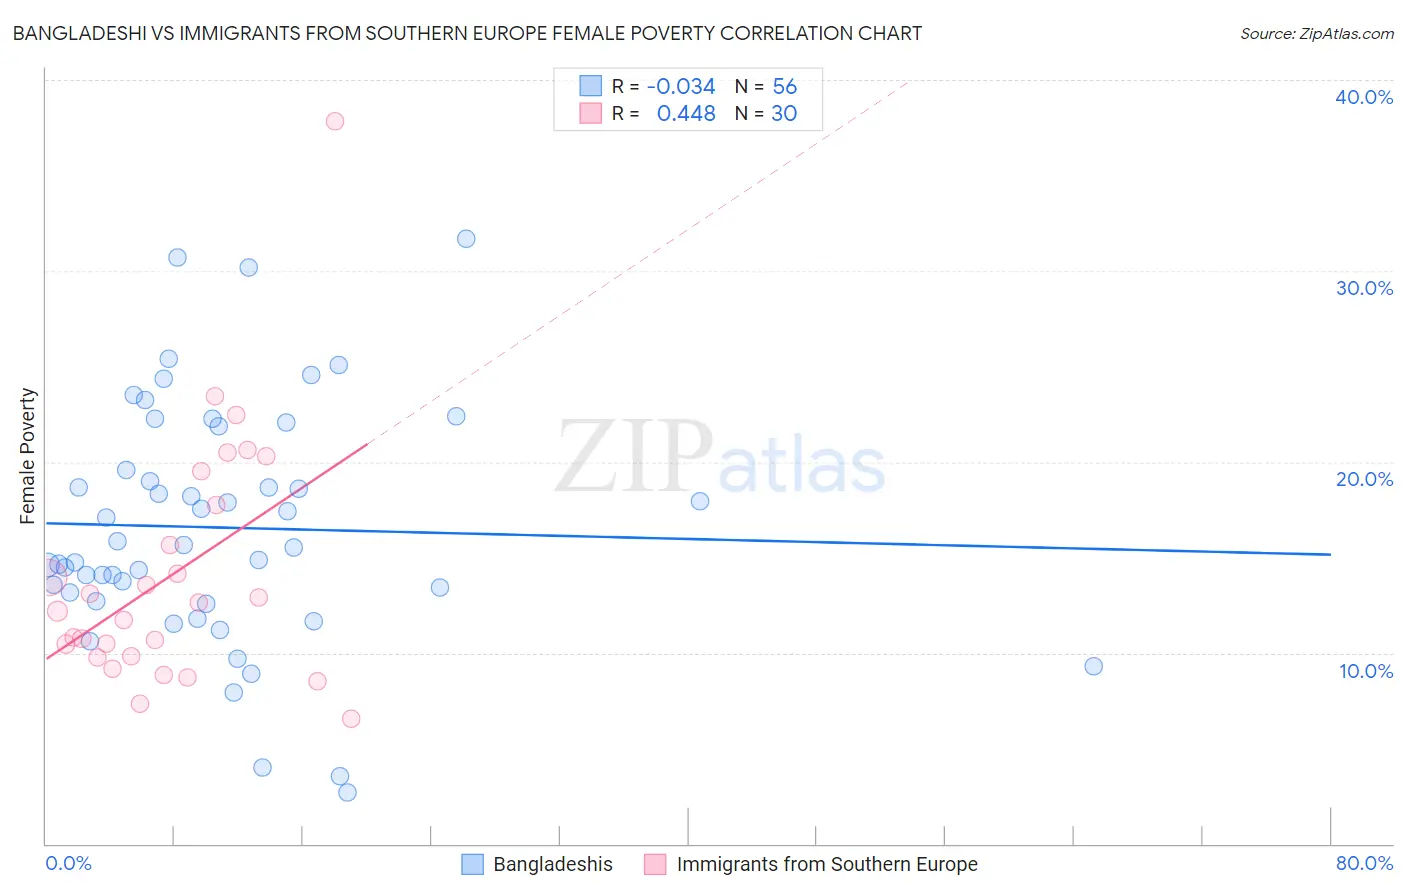 Bangladeshi vs Immigrants from Southern Europe Female Poverty